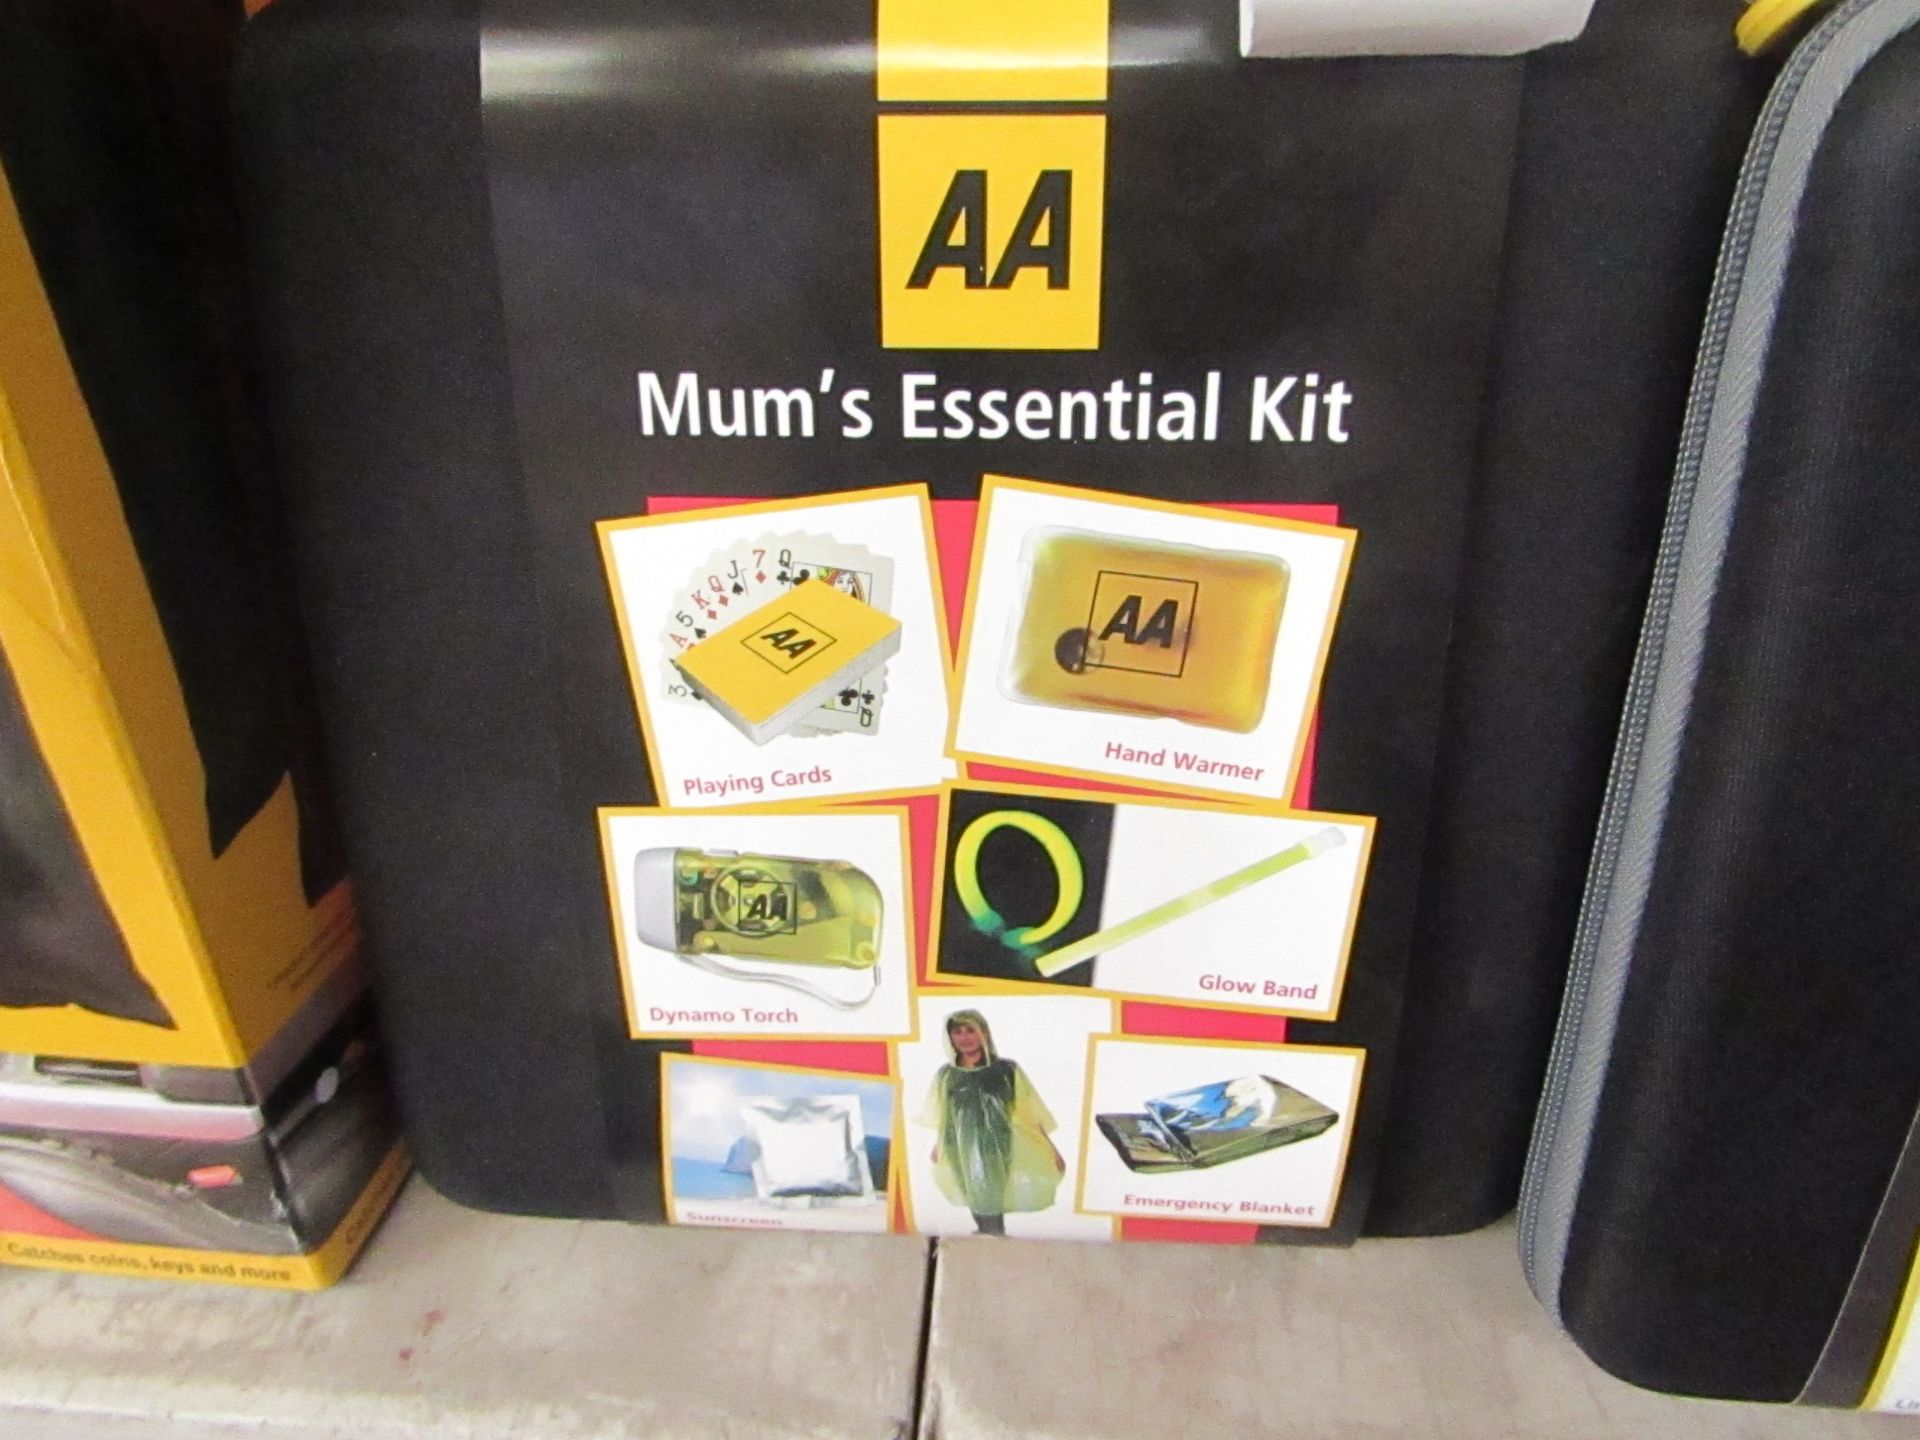 AA mums essential kit, new and packaged.